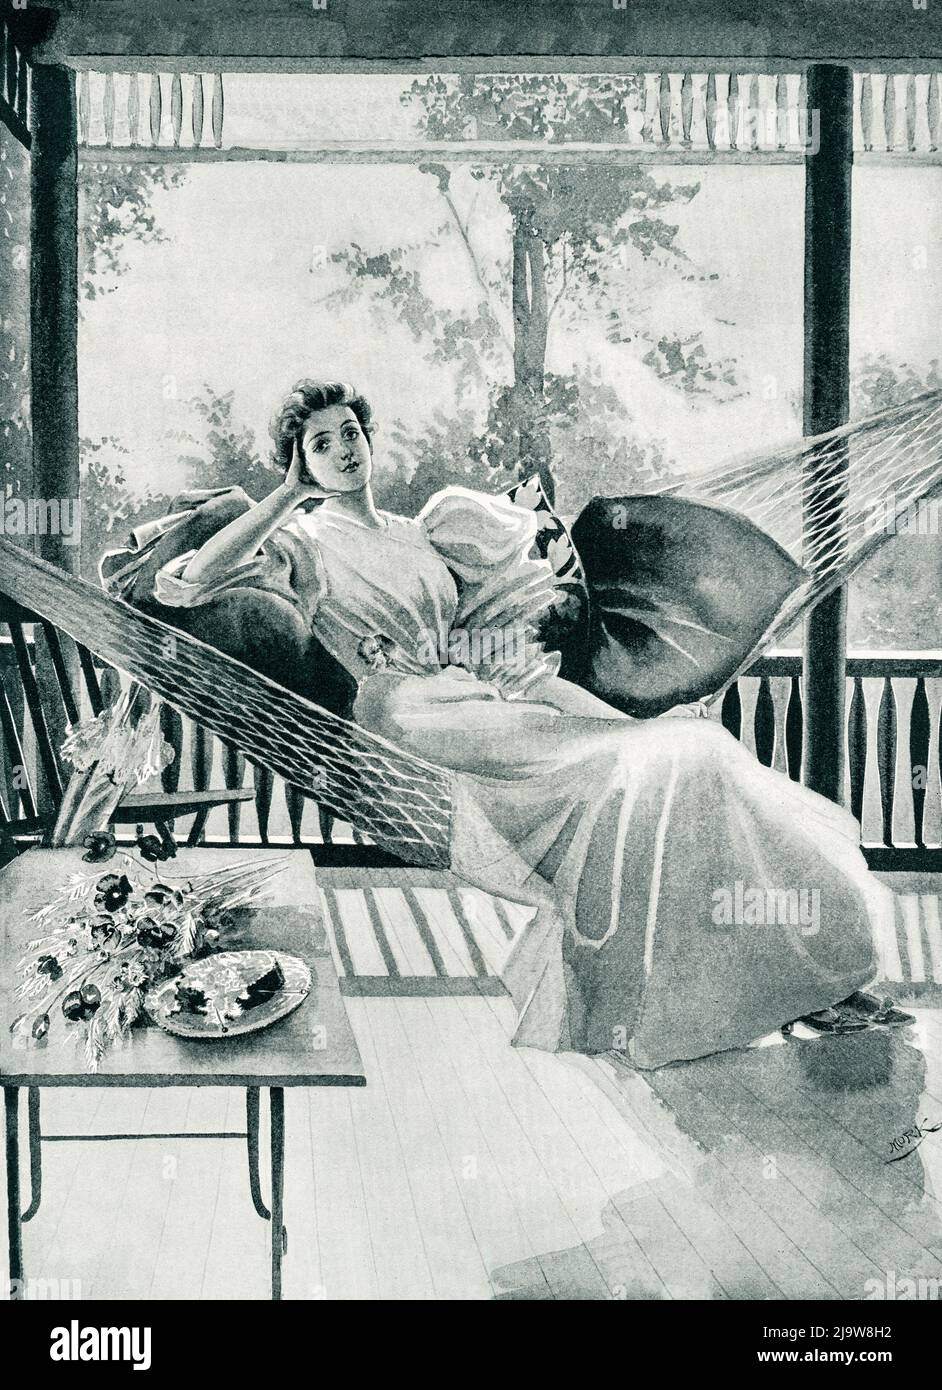 An illustration of a woman relaxing in a porch on a hamper by Frances Benjamin Johnston (1864-1952) from the August 1895 cover of Jenness Miller Monthly, August 1895. Stock Photo